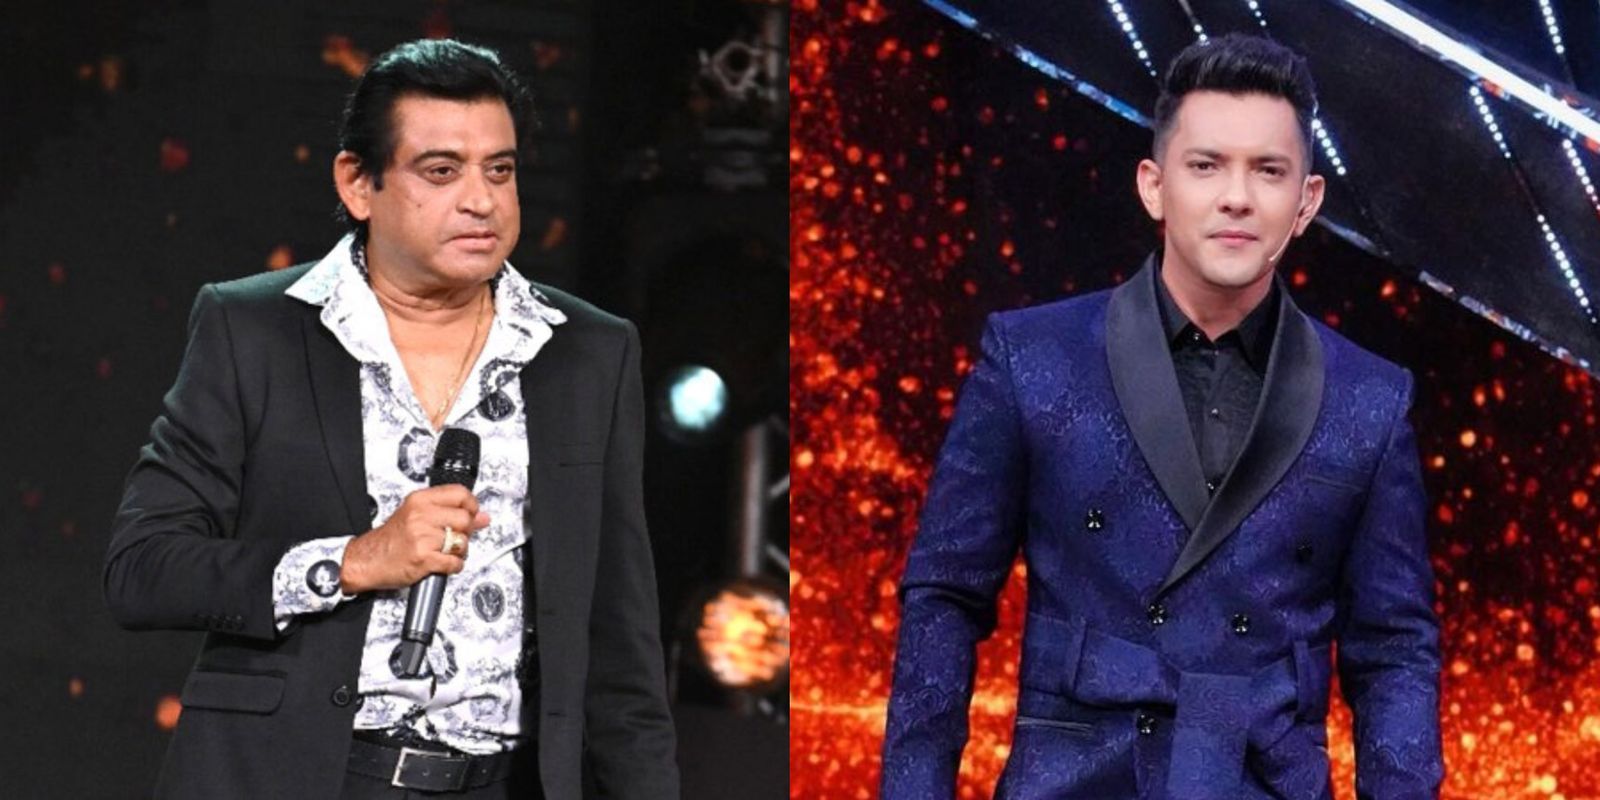 Indian Idol 12 Host Aditya Reacts To Amit Kumar’s Claims; Says If He Wasn’t Happy, He Could’ve Told Them During Shoot